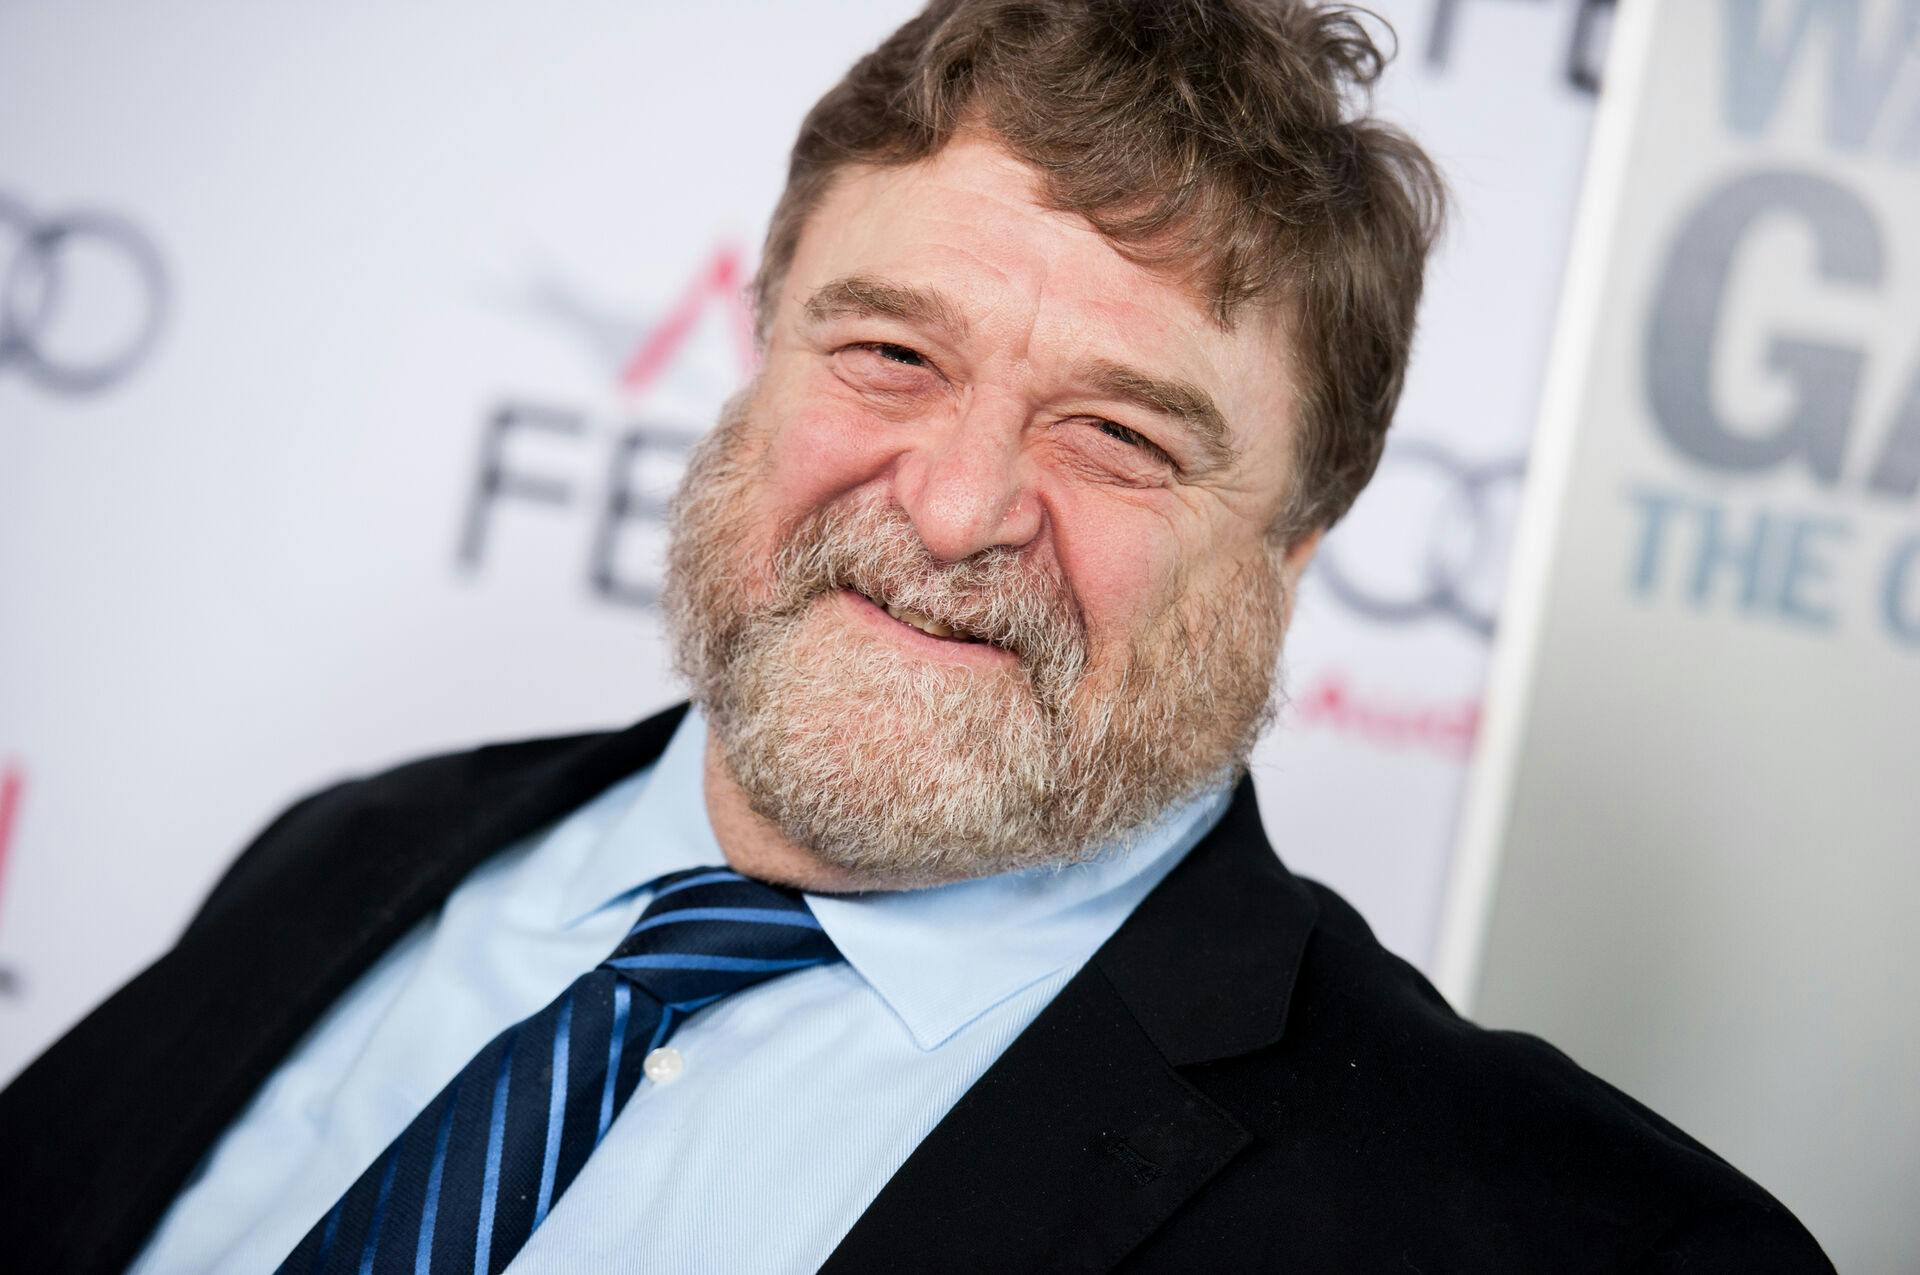 John Goodman arrives at the 2014 AFI Fest - "The Gambler" on Monday, Nov 10, 2014, in Los Angeles. (Photo by Richard Shotwell/Invision/AP)